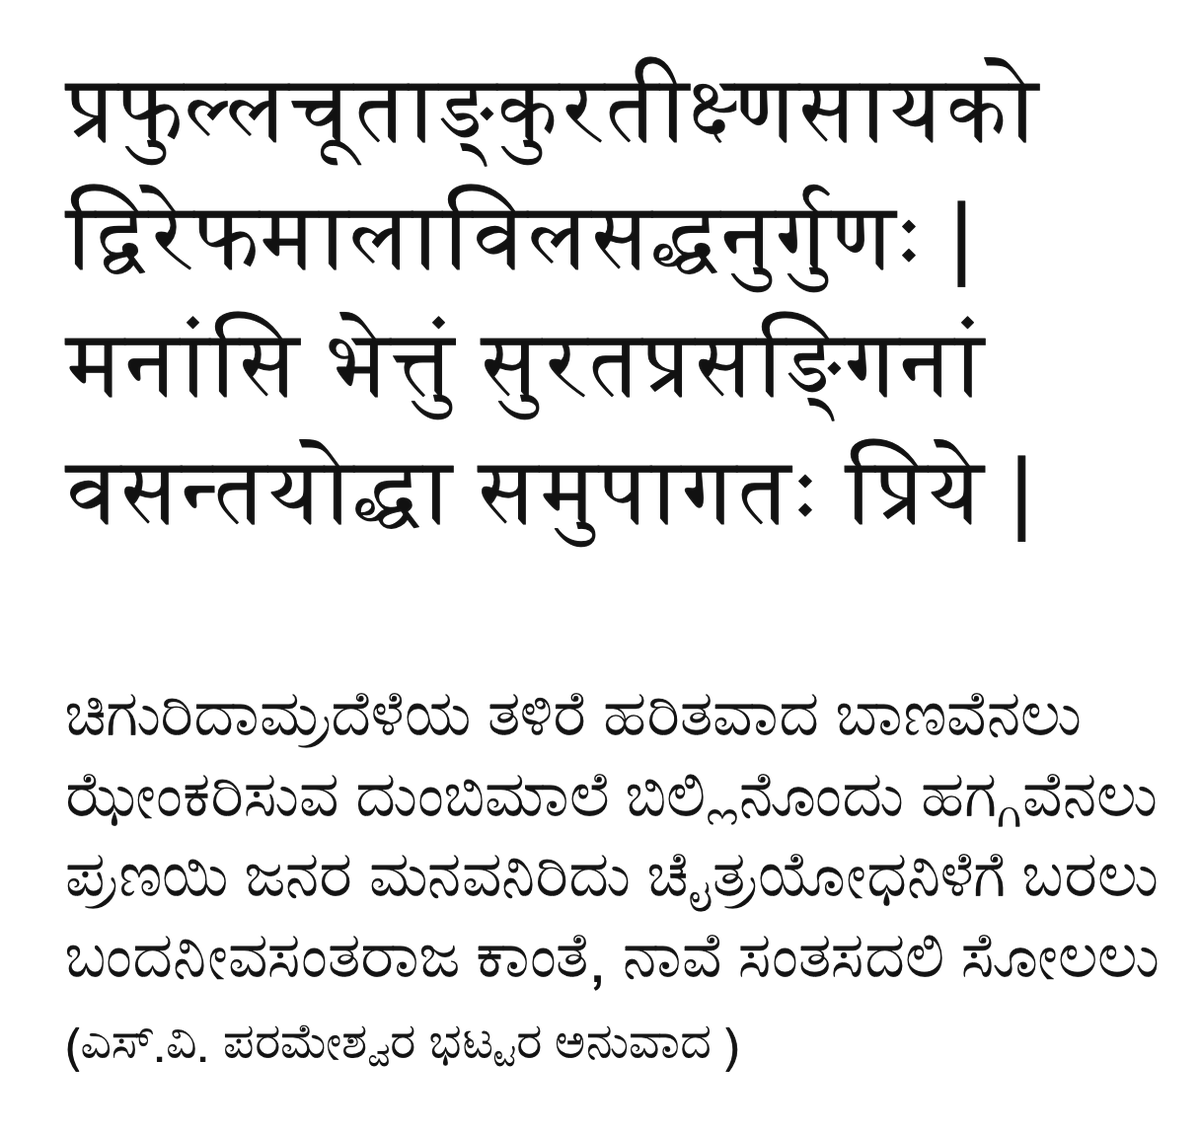 Though Kalidasa has composed better seasonal verses in his mahakavyas, Rtusamhara is unique since it is the first (and only?) work that is entirely on seasons. There are 6 cantos, each dedicated to a Rtu.S.V. Parameshwara Bhatta's Kannada translation is one of the finest.